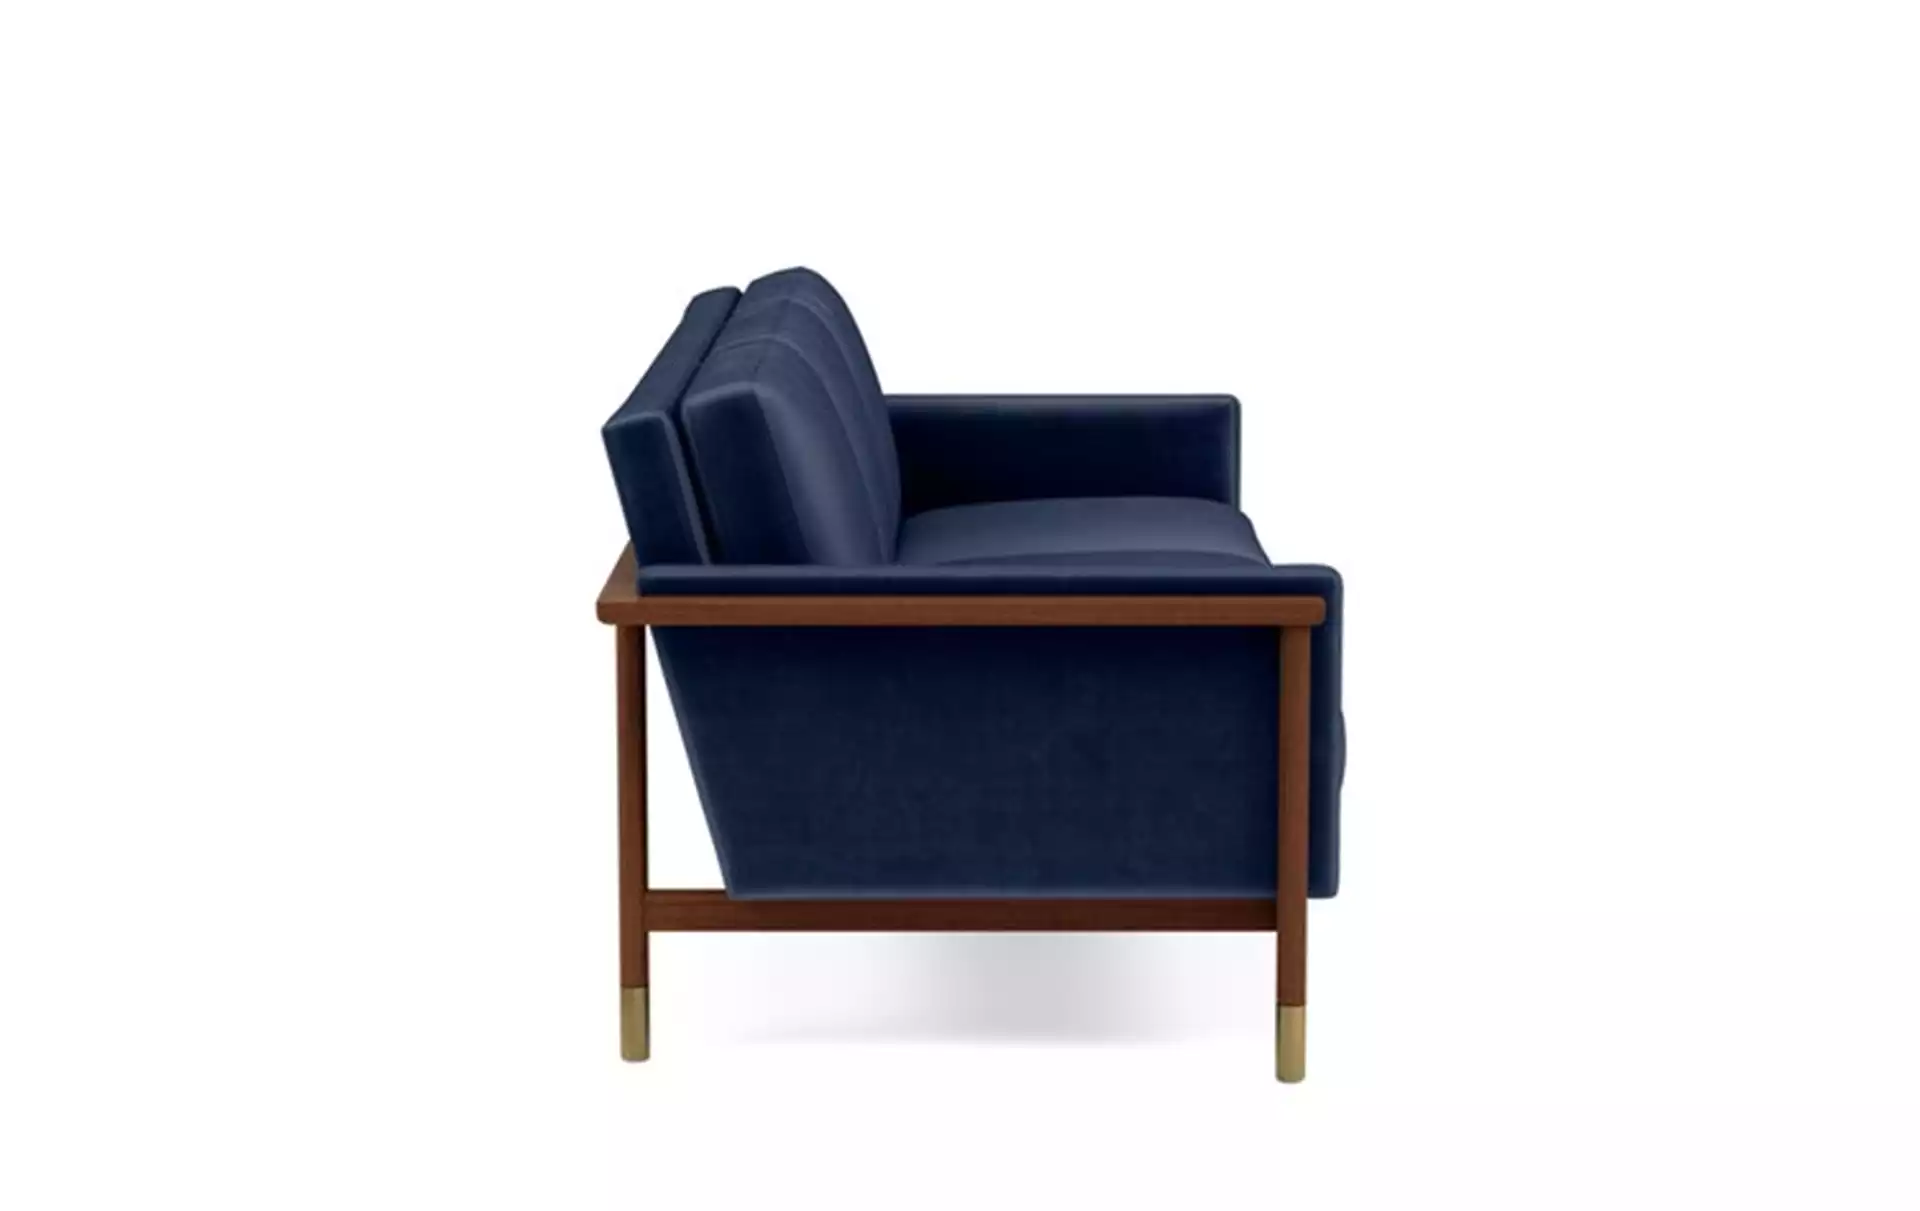 Jason Wu Sofa with Blue Bergen Blue Fabric and Oiled Walnut with Brass Cap legs